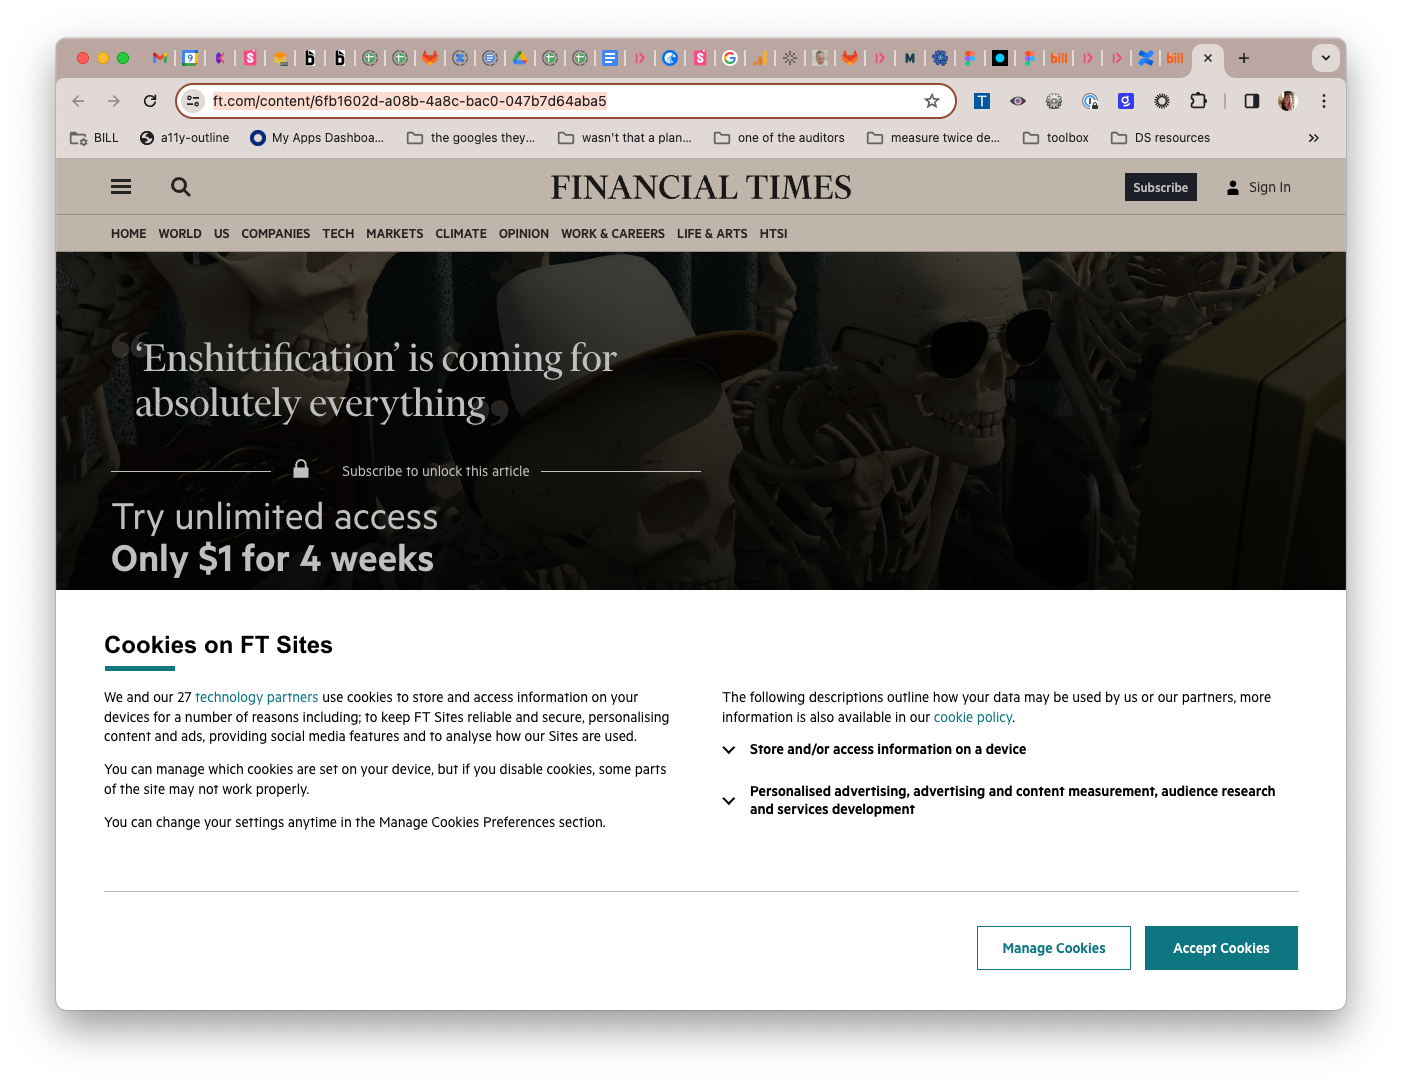 A screenshot of the Financial Times article enshittification is coming for absolutely everything indicating that the article is blocked by a paywall and the cookies dialog. the cookies dialog mentioned that the financial times has 27 technology partners storing cookies on their site. 